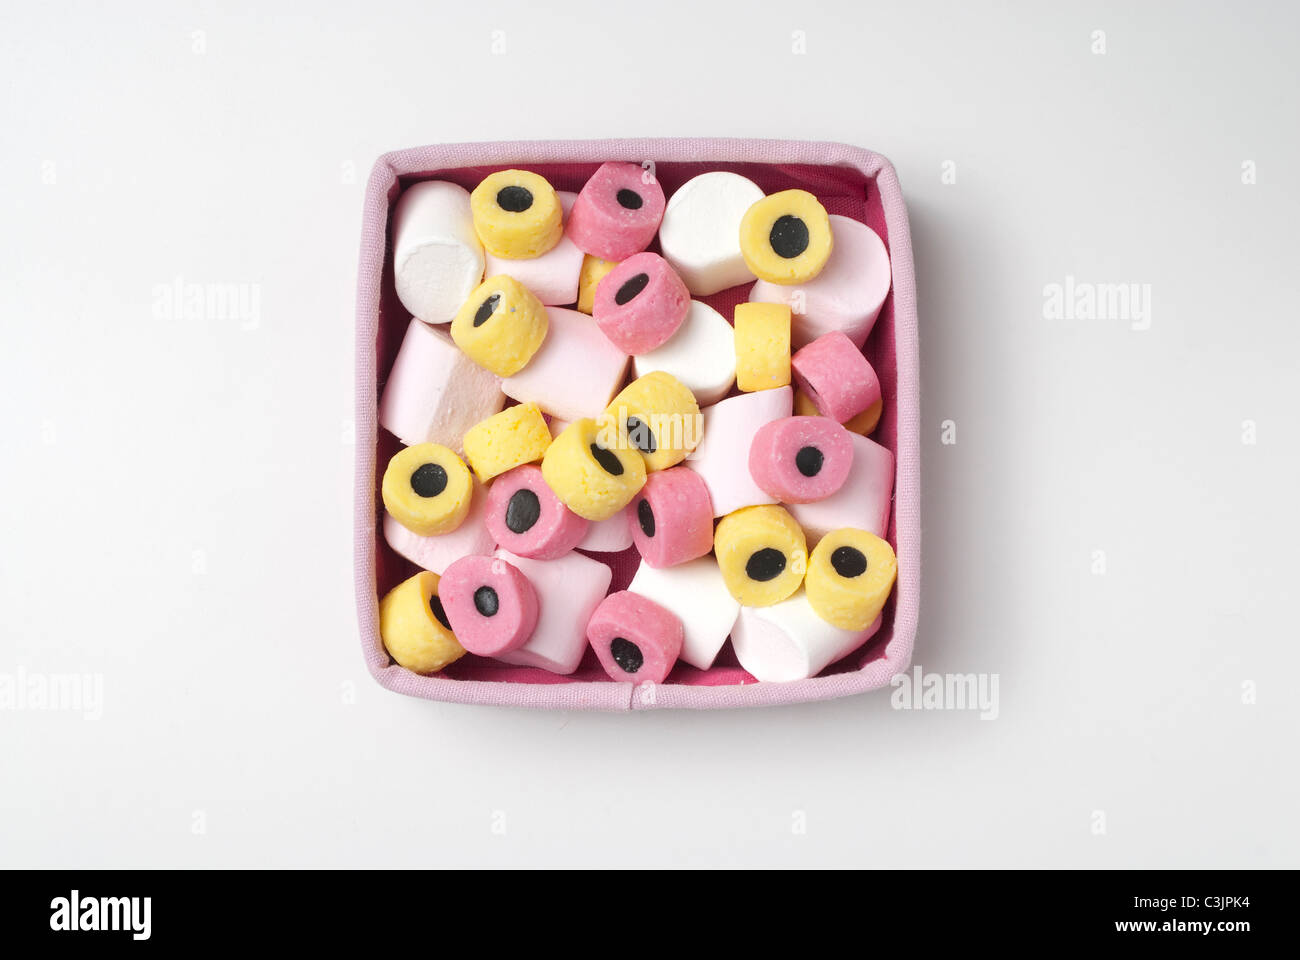 Marshmallows and Liquorice Allsorts framed in pink box Stock Photo